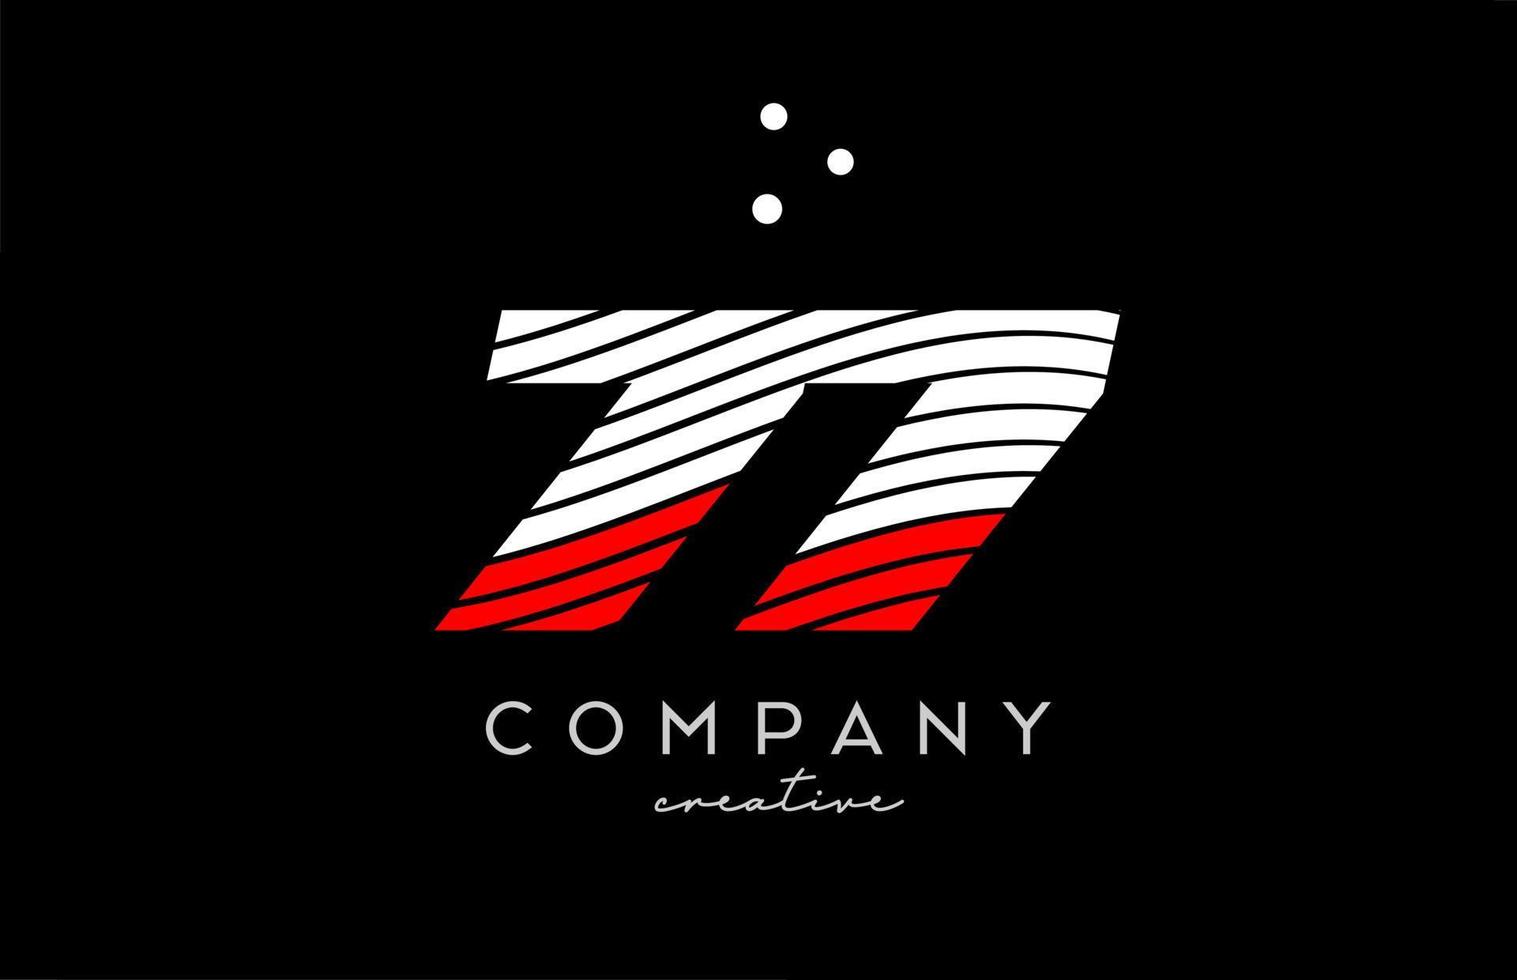 77 number logo with red white lines and dots. Corporate creative template design for business and company vector